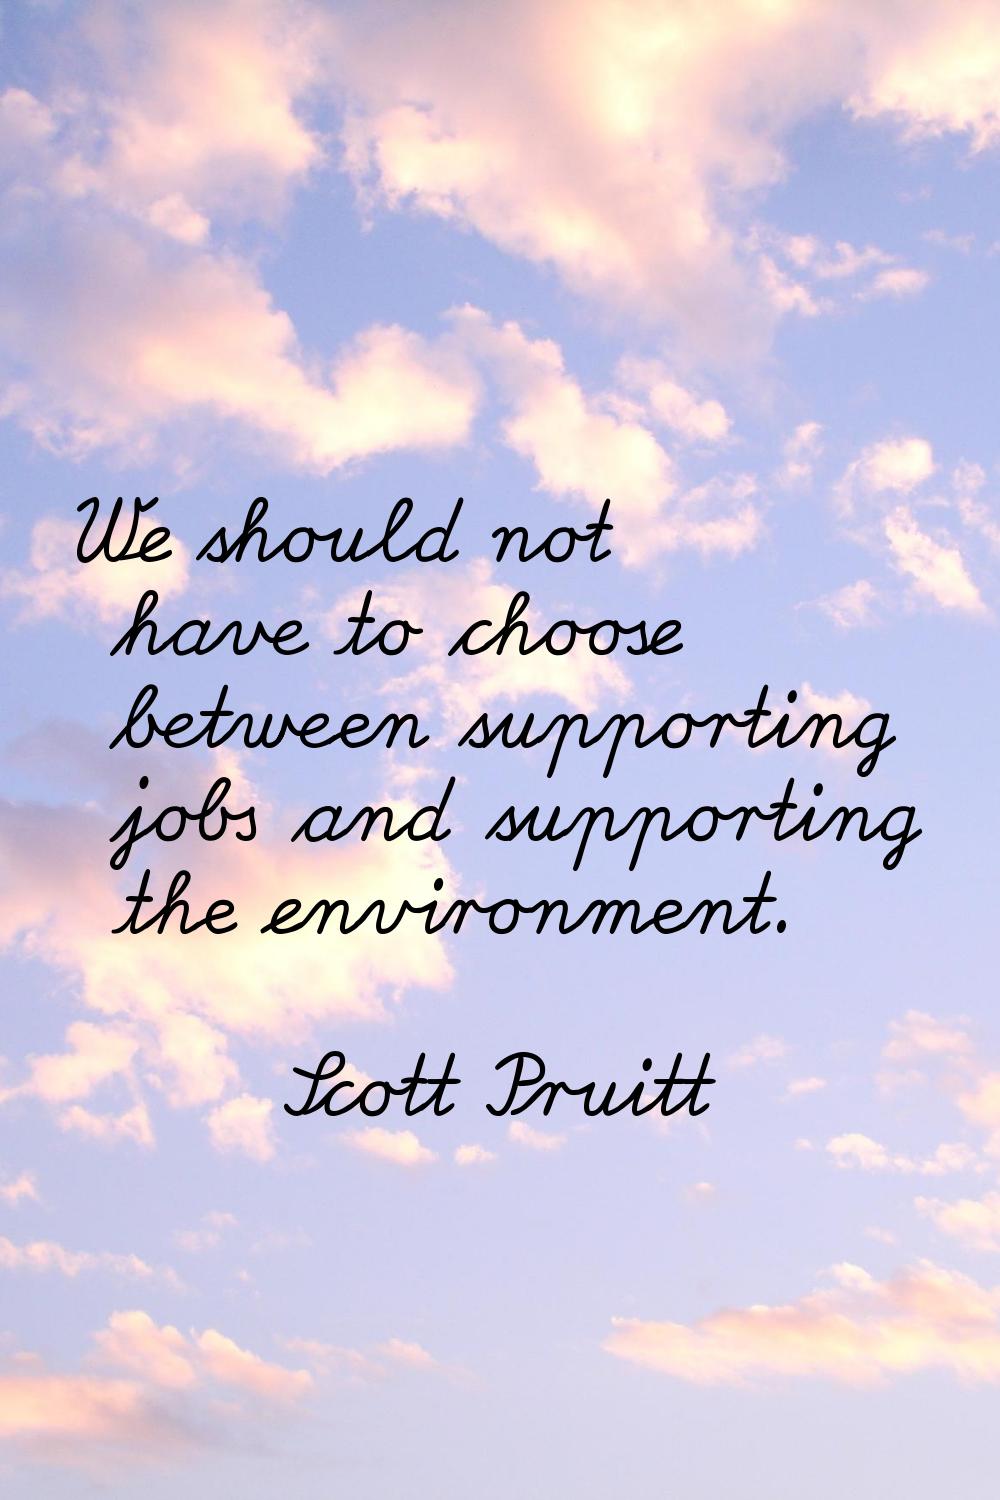 We should not have to choose between supporting jobs and supporting the environment.